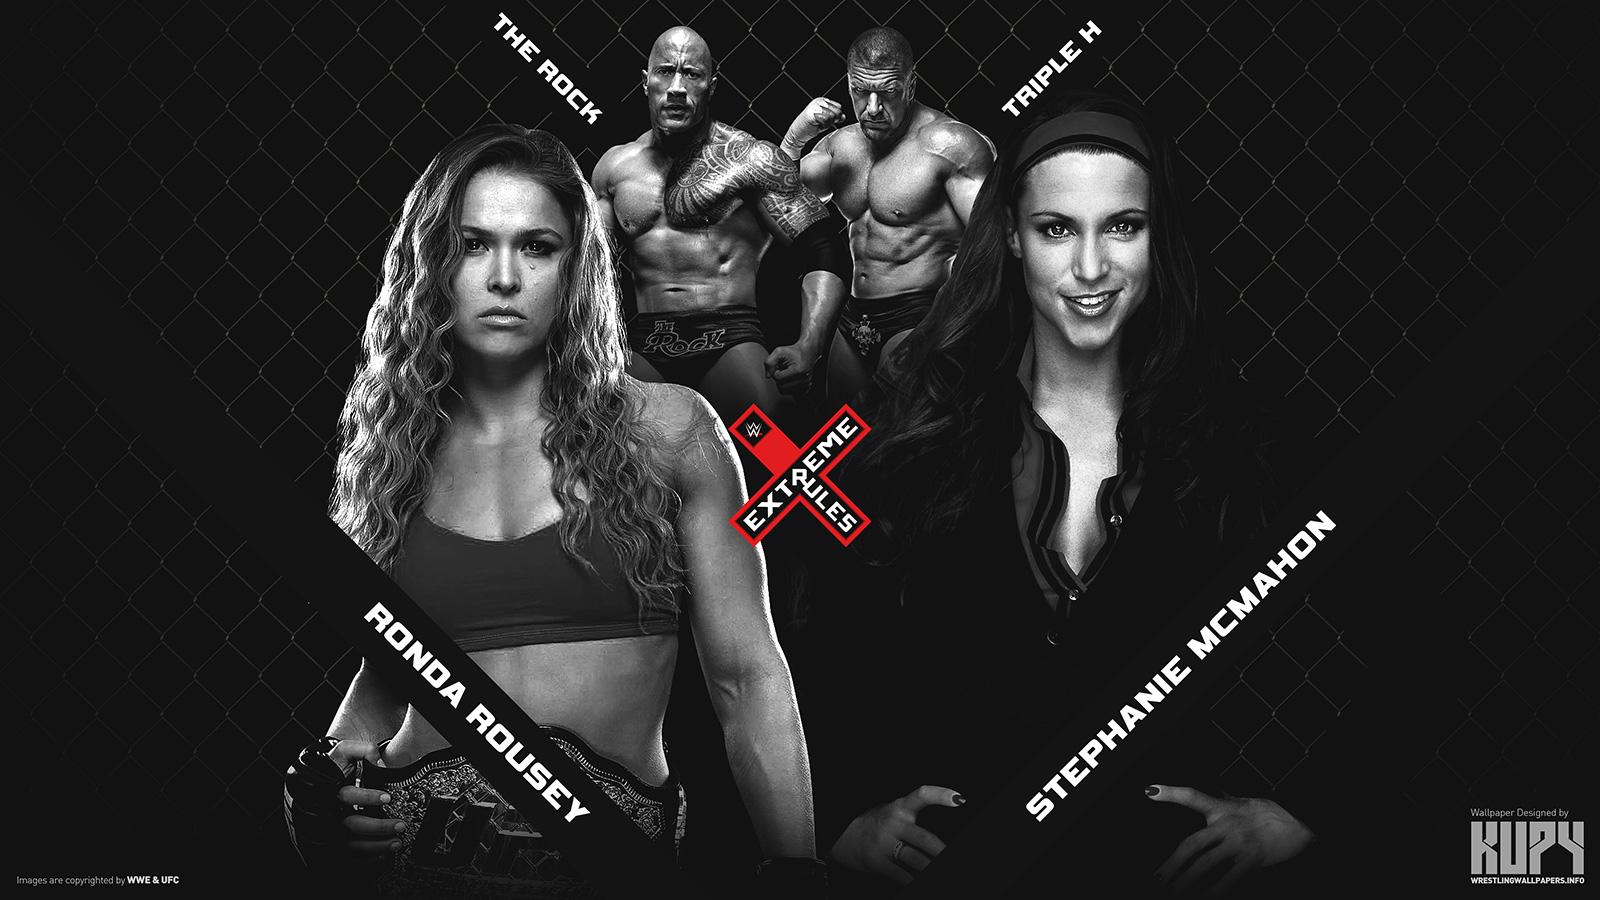 WWE image The Rock and Ronda Rousey vs Triple H and Stephanie HD